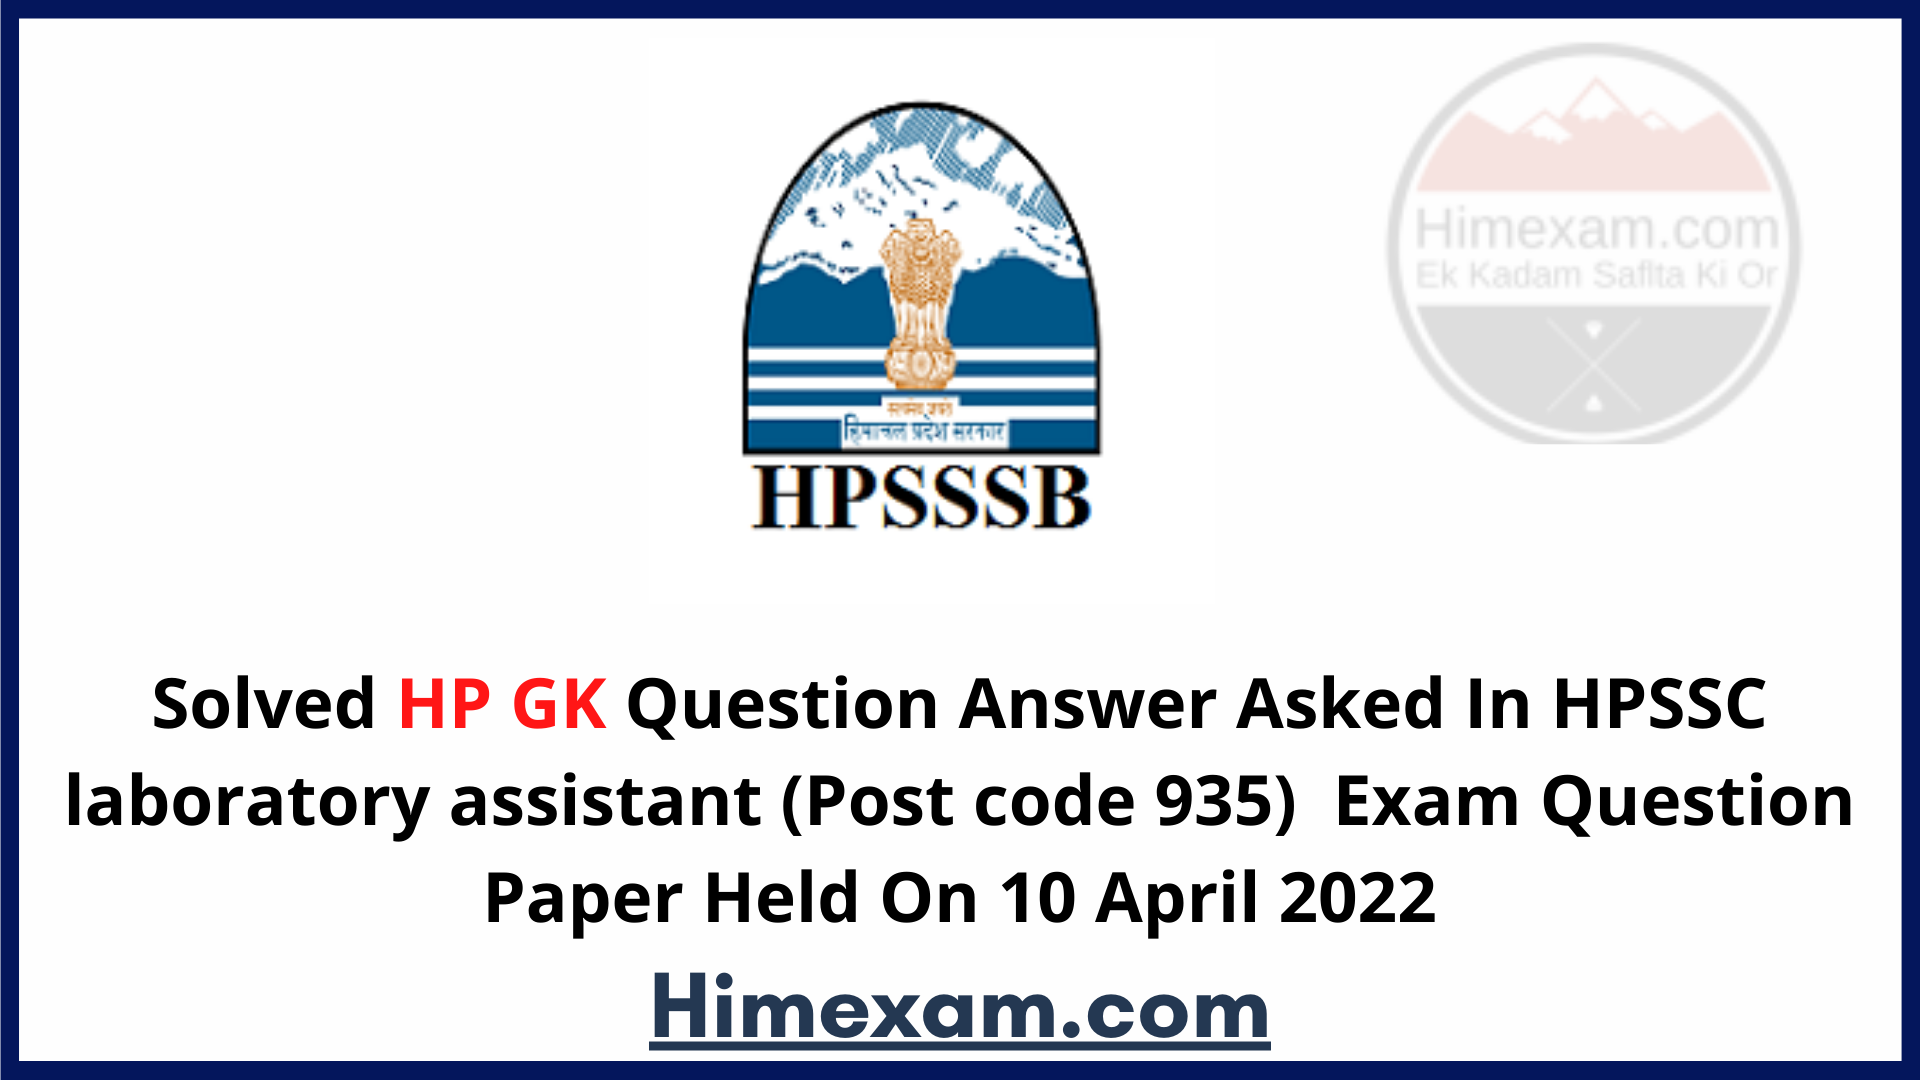 Solved HP GK Question Answer Asked In HPSSC laboratory assistant (Post code 935)  Exam Question Paper Held On 10 April 2022Solved HP GK Question Answer Asked In HPSSC laboratory assistant (Post code 935)  Exam Question Paper Held On 10 April 2022